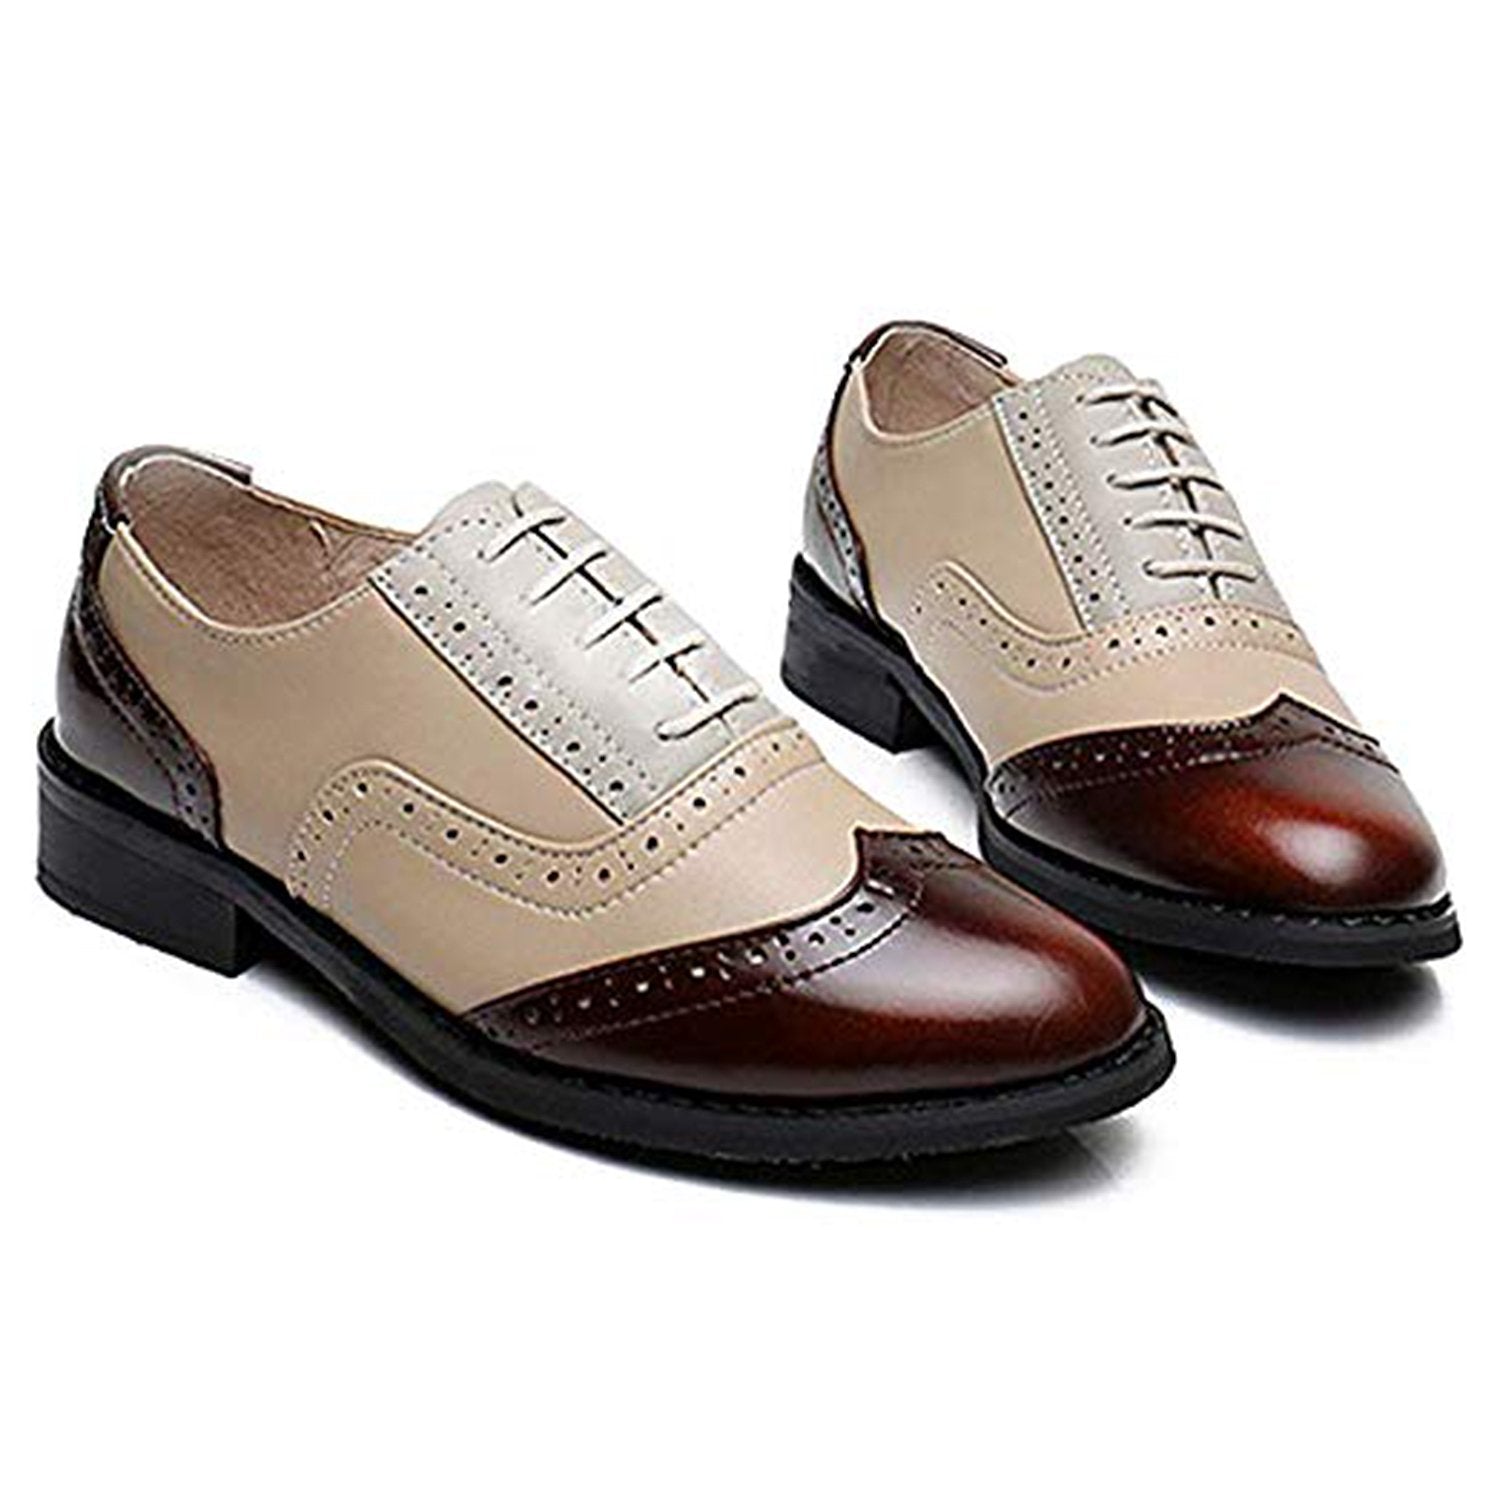 Classical-Leather-Wing-up-Brogues-Flat-Lace-up-Oxford-Shoes-Loafers